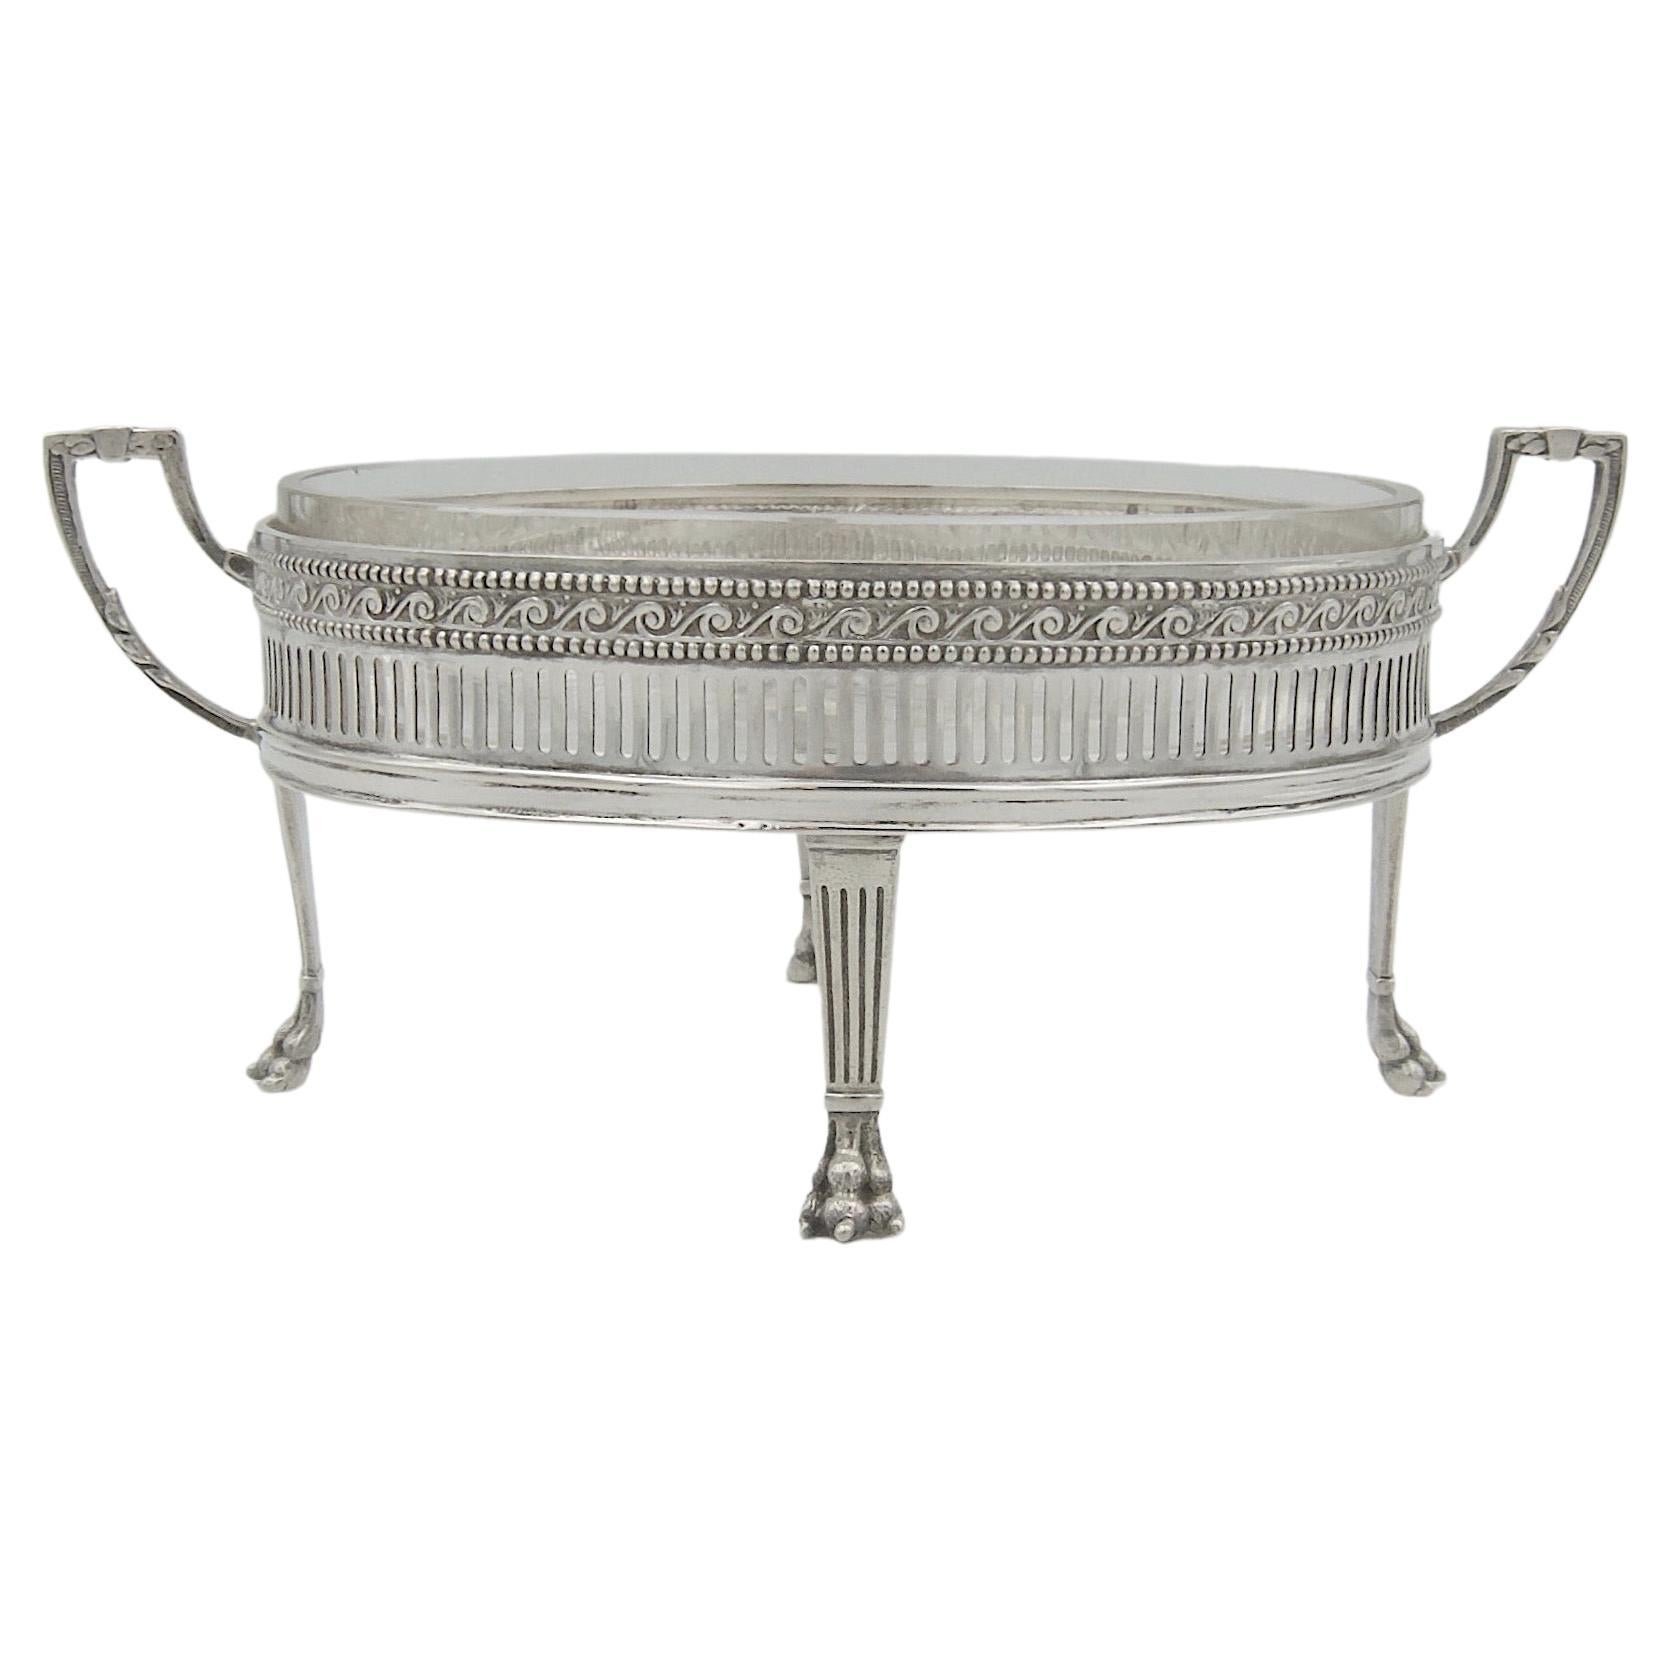 Antique Neoclassical Silver Sweetmeat Dish by Hugo Bohm of Germany